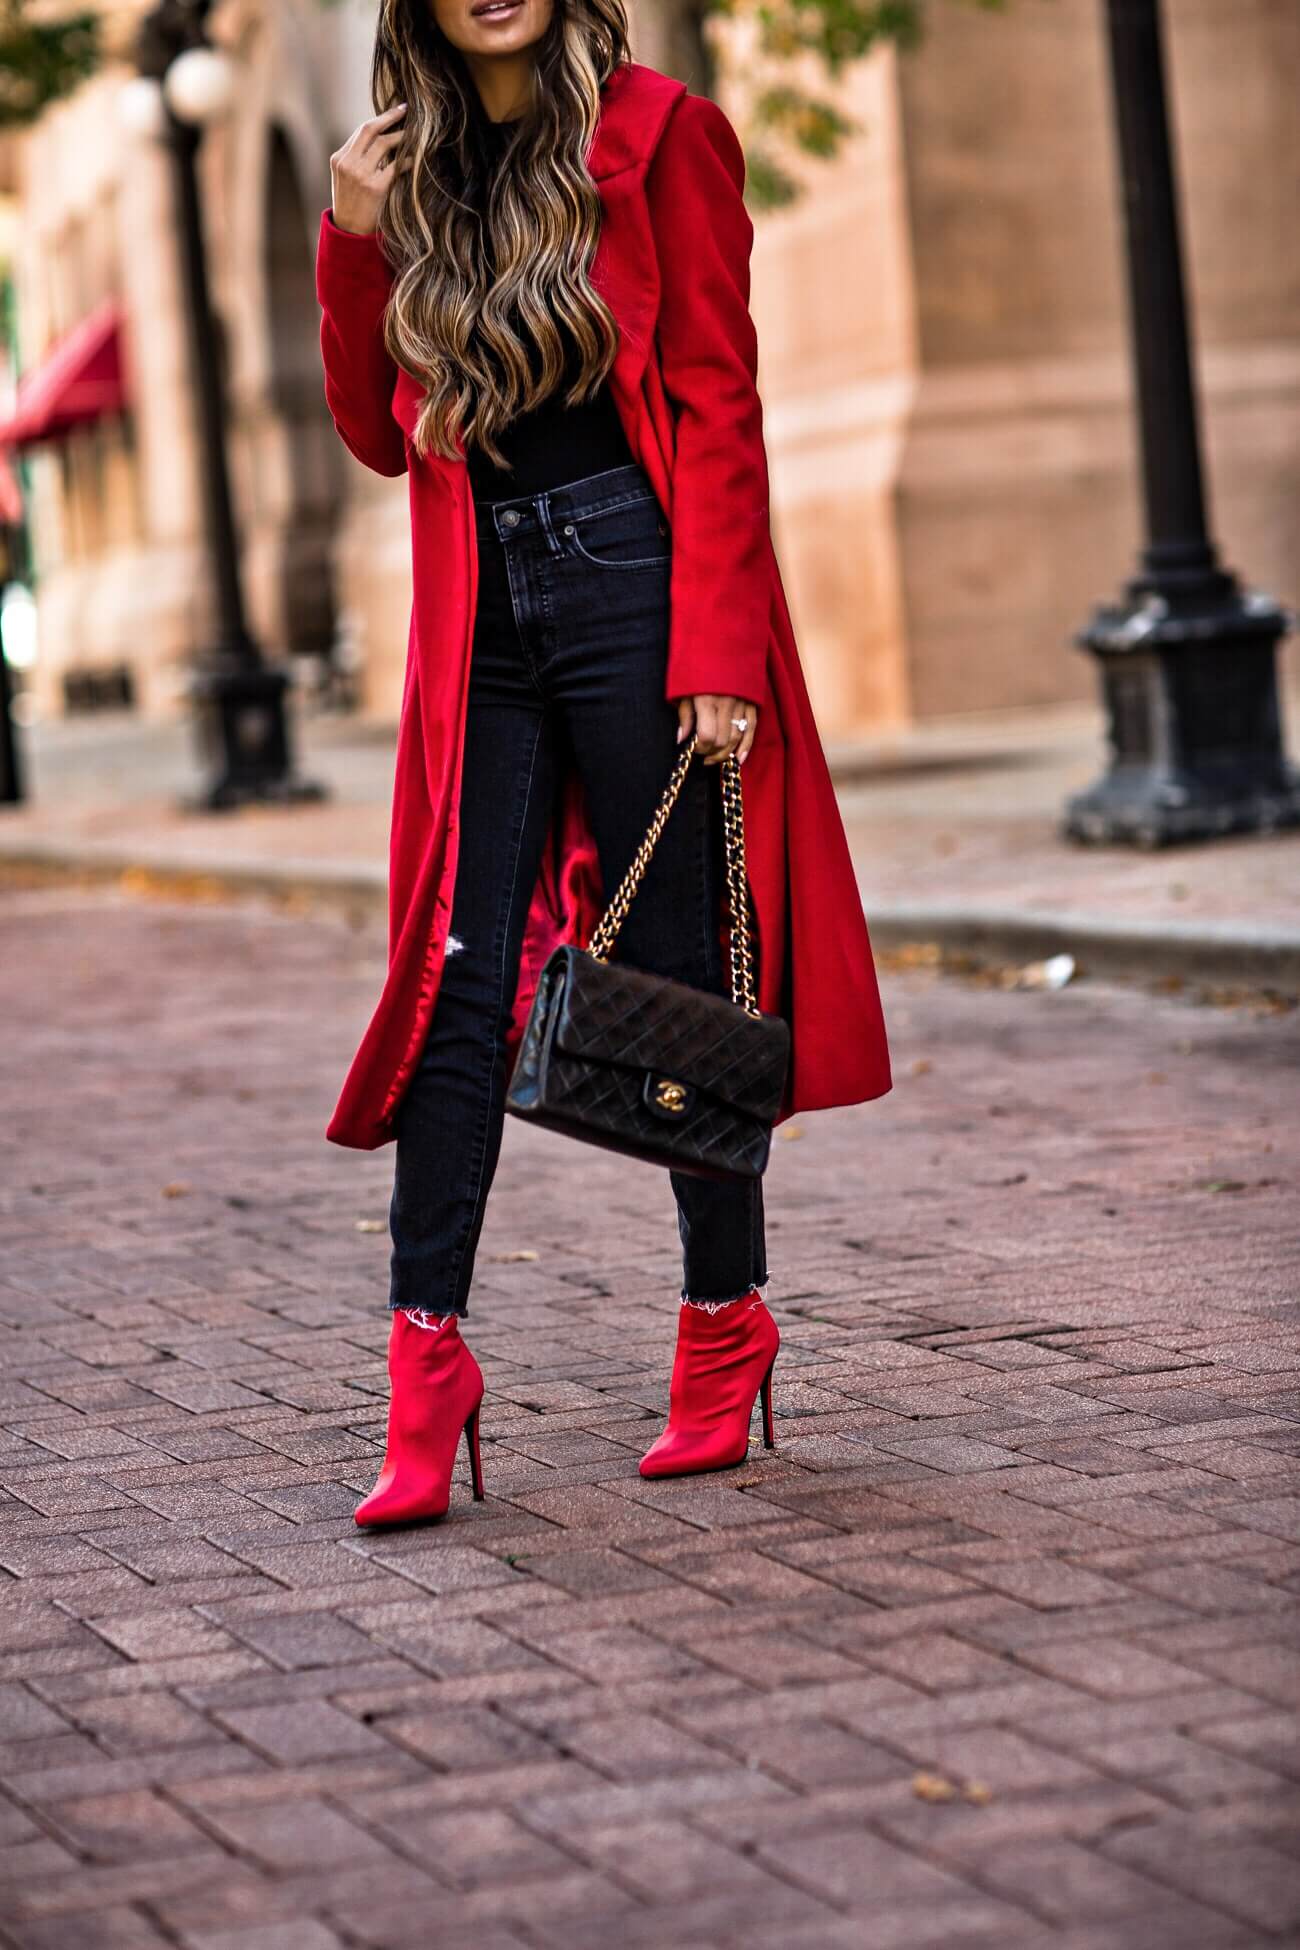 fashion blogger mia mia mine wearing a red coat from bloomingdale's